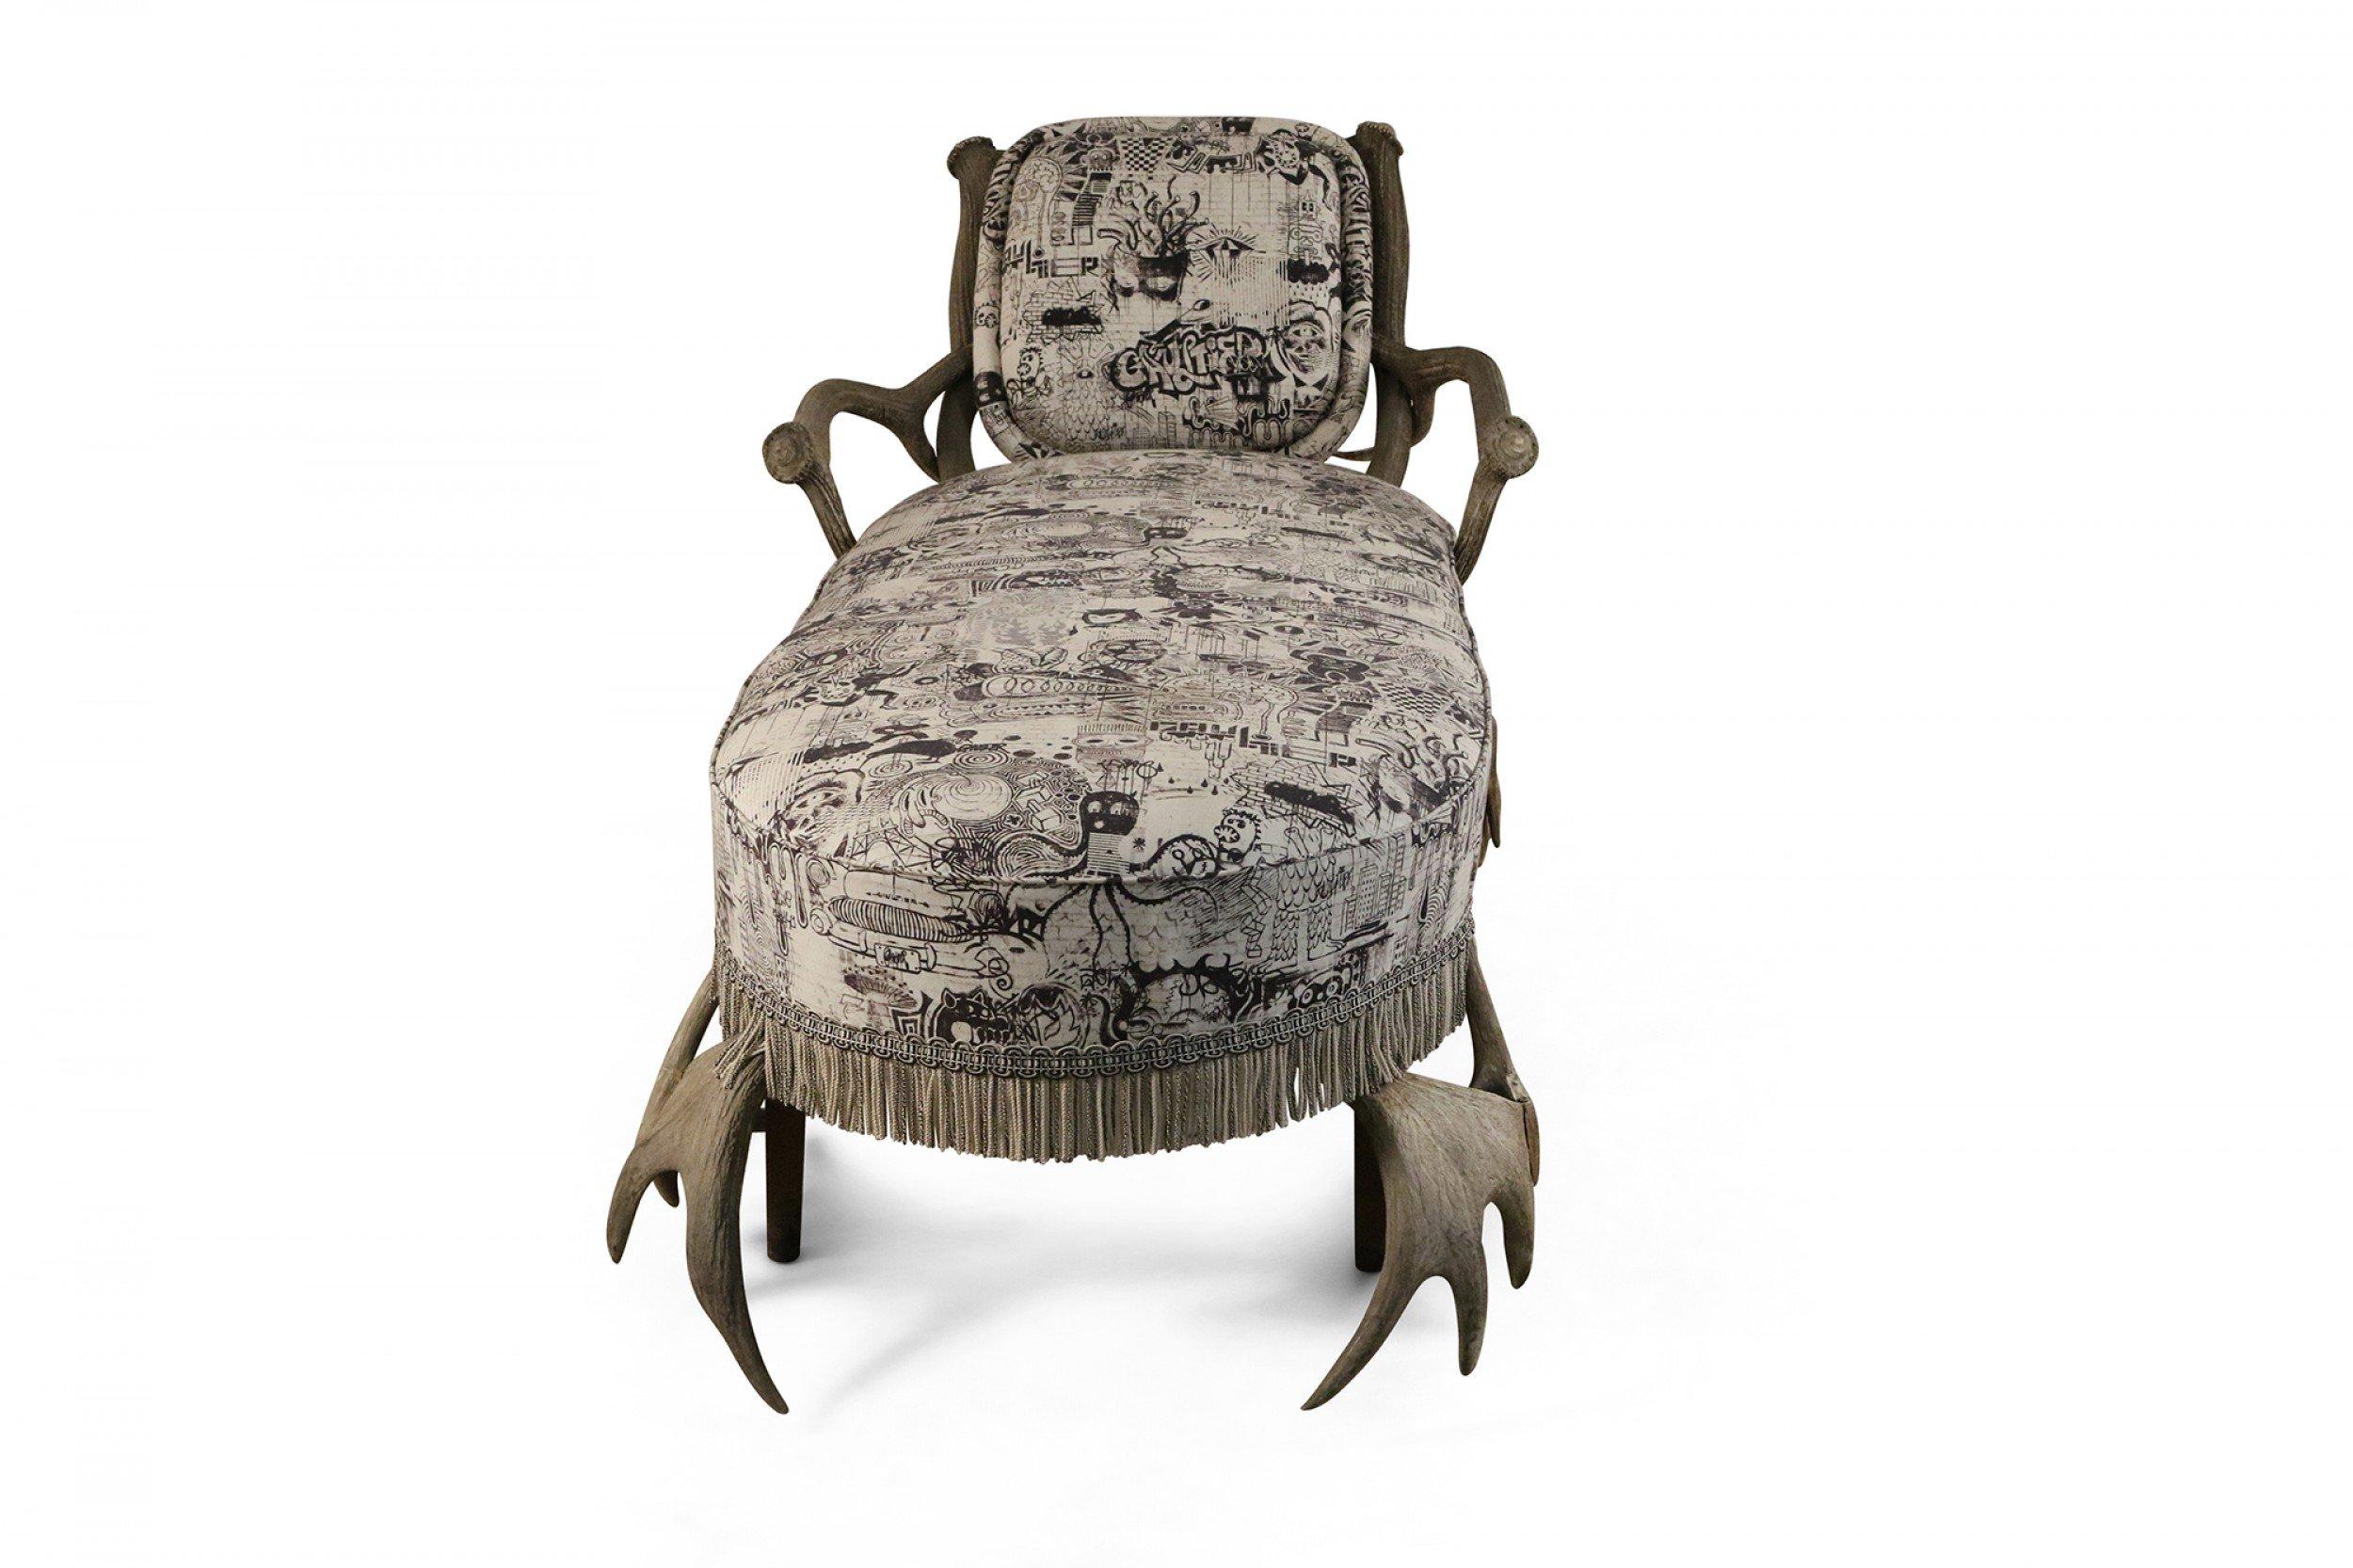 Continental (19th century-Probably German) horn and antler chaise with graphic print black and white upholstery and two matching throw pillows.
      